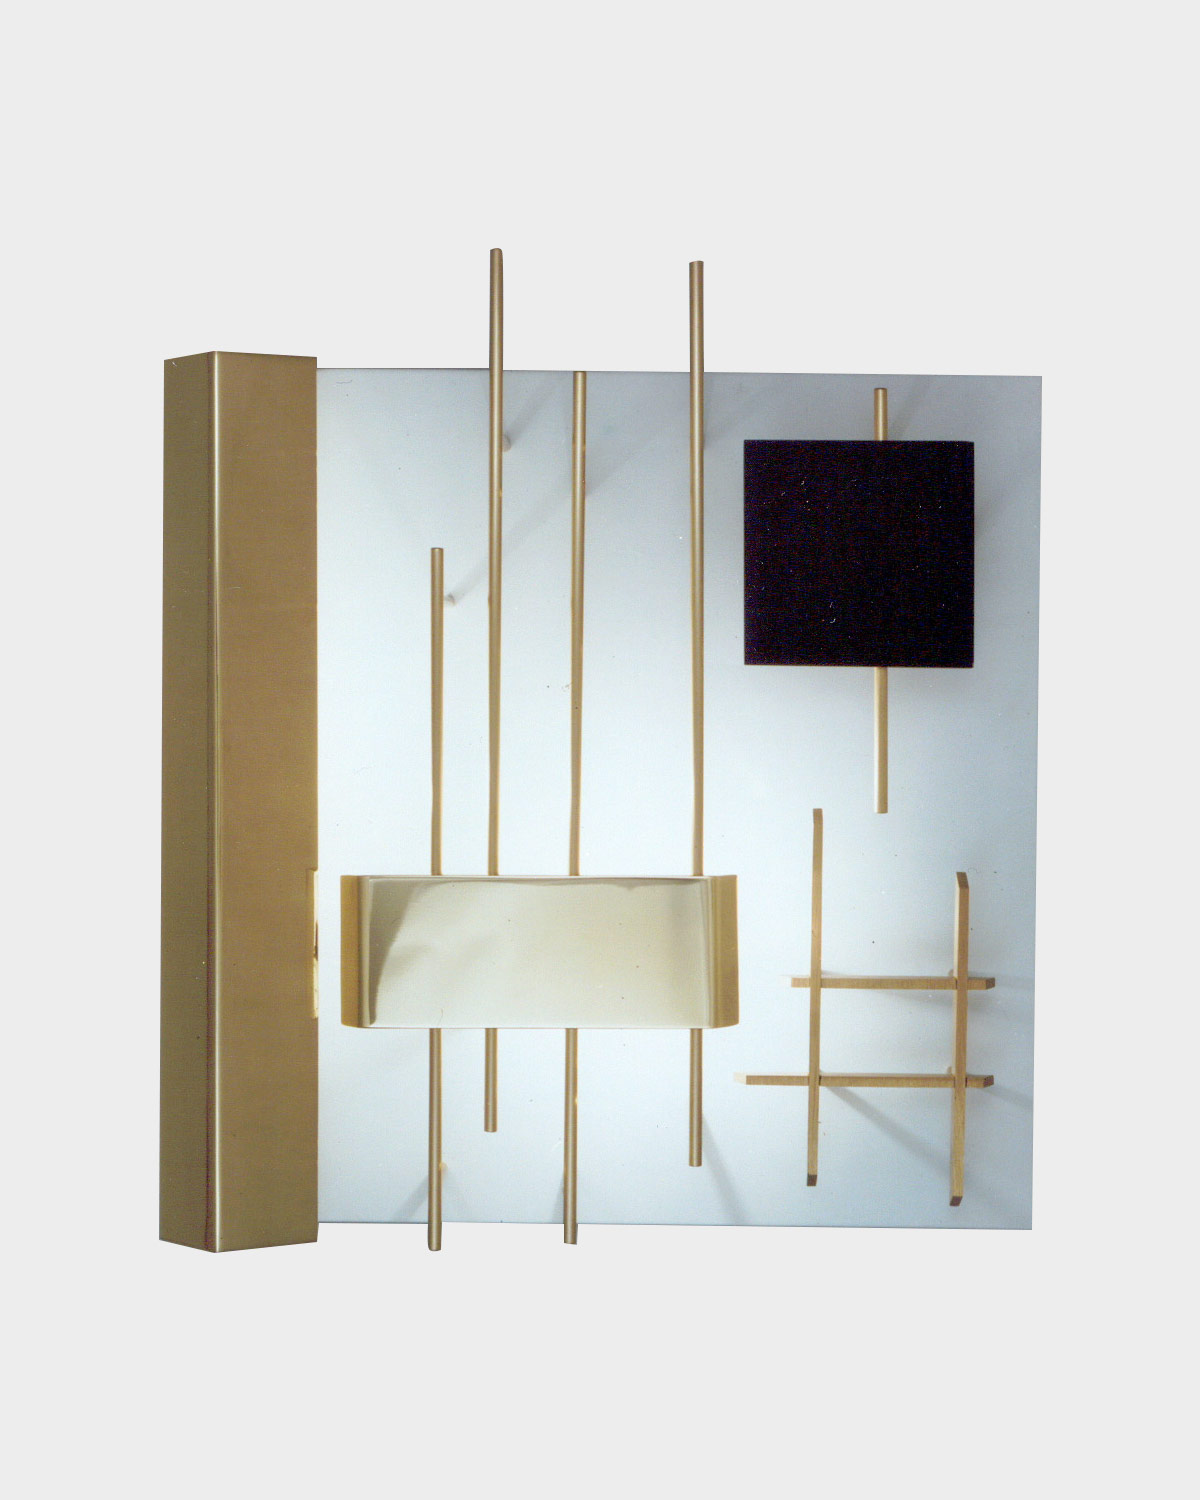 Wall Sconce by Gio Ponti for Lumi, model 575